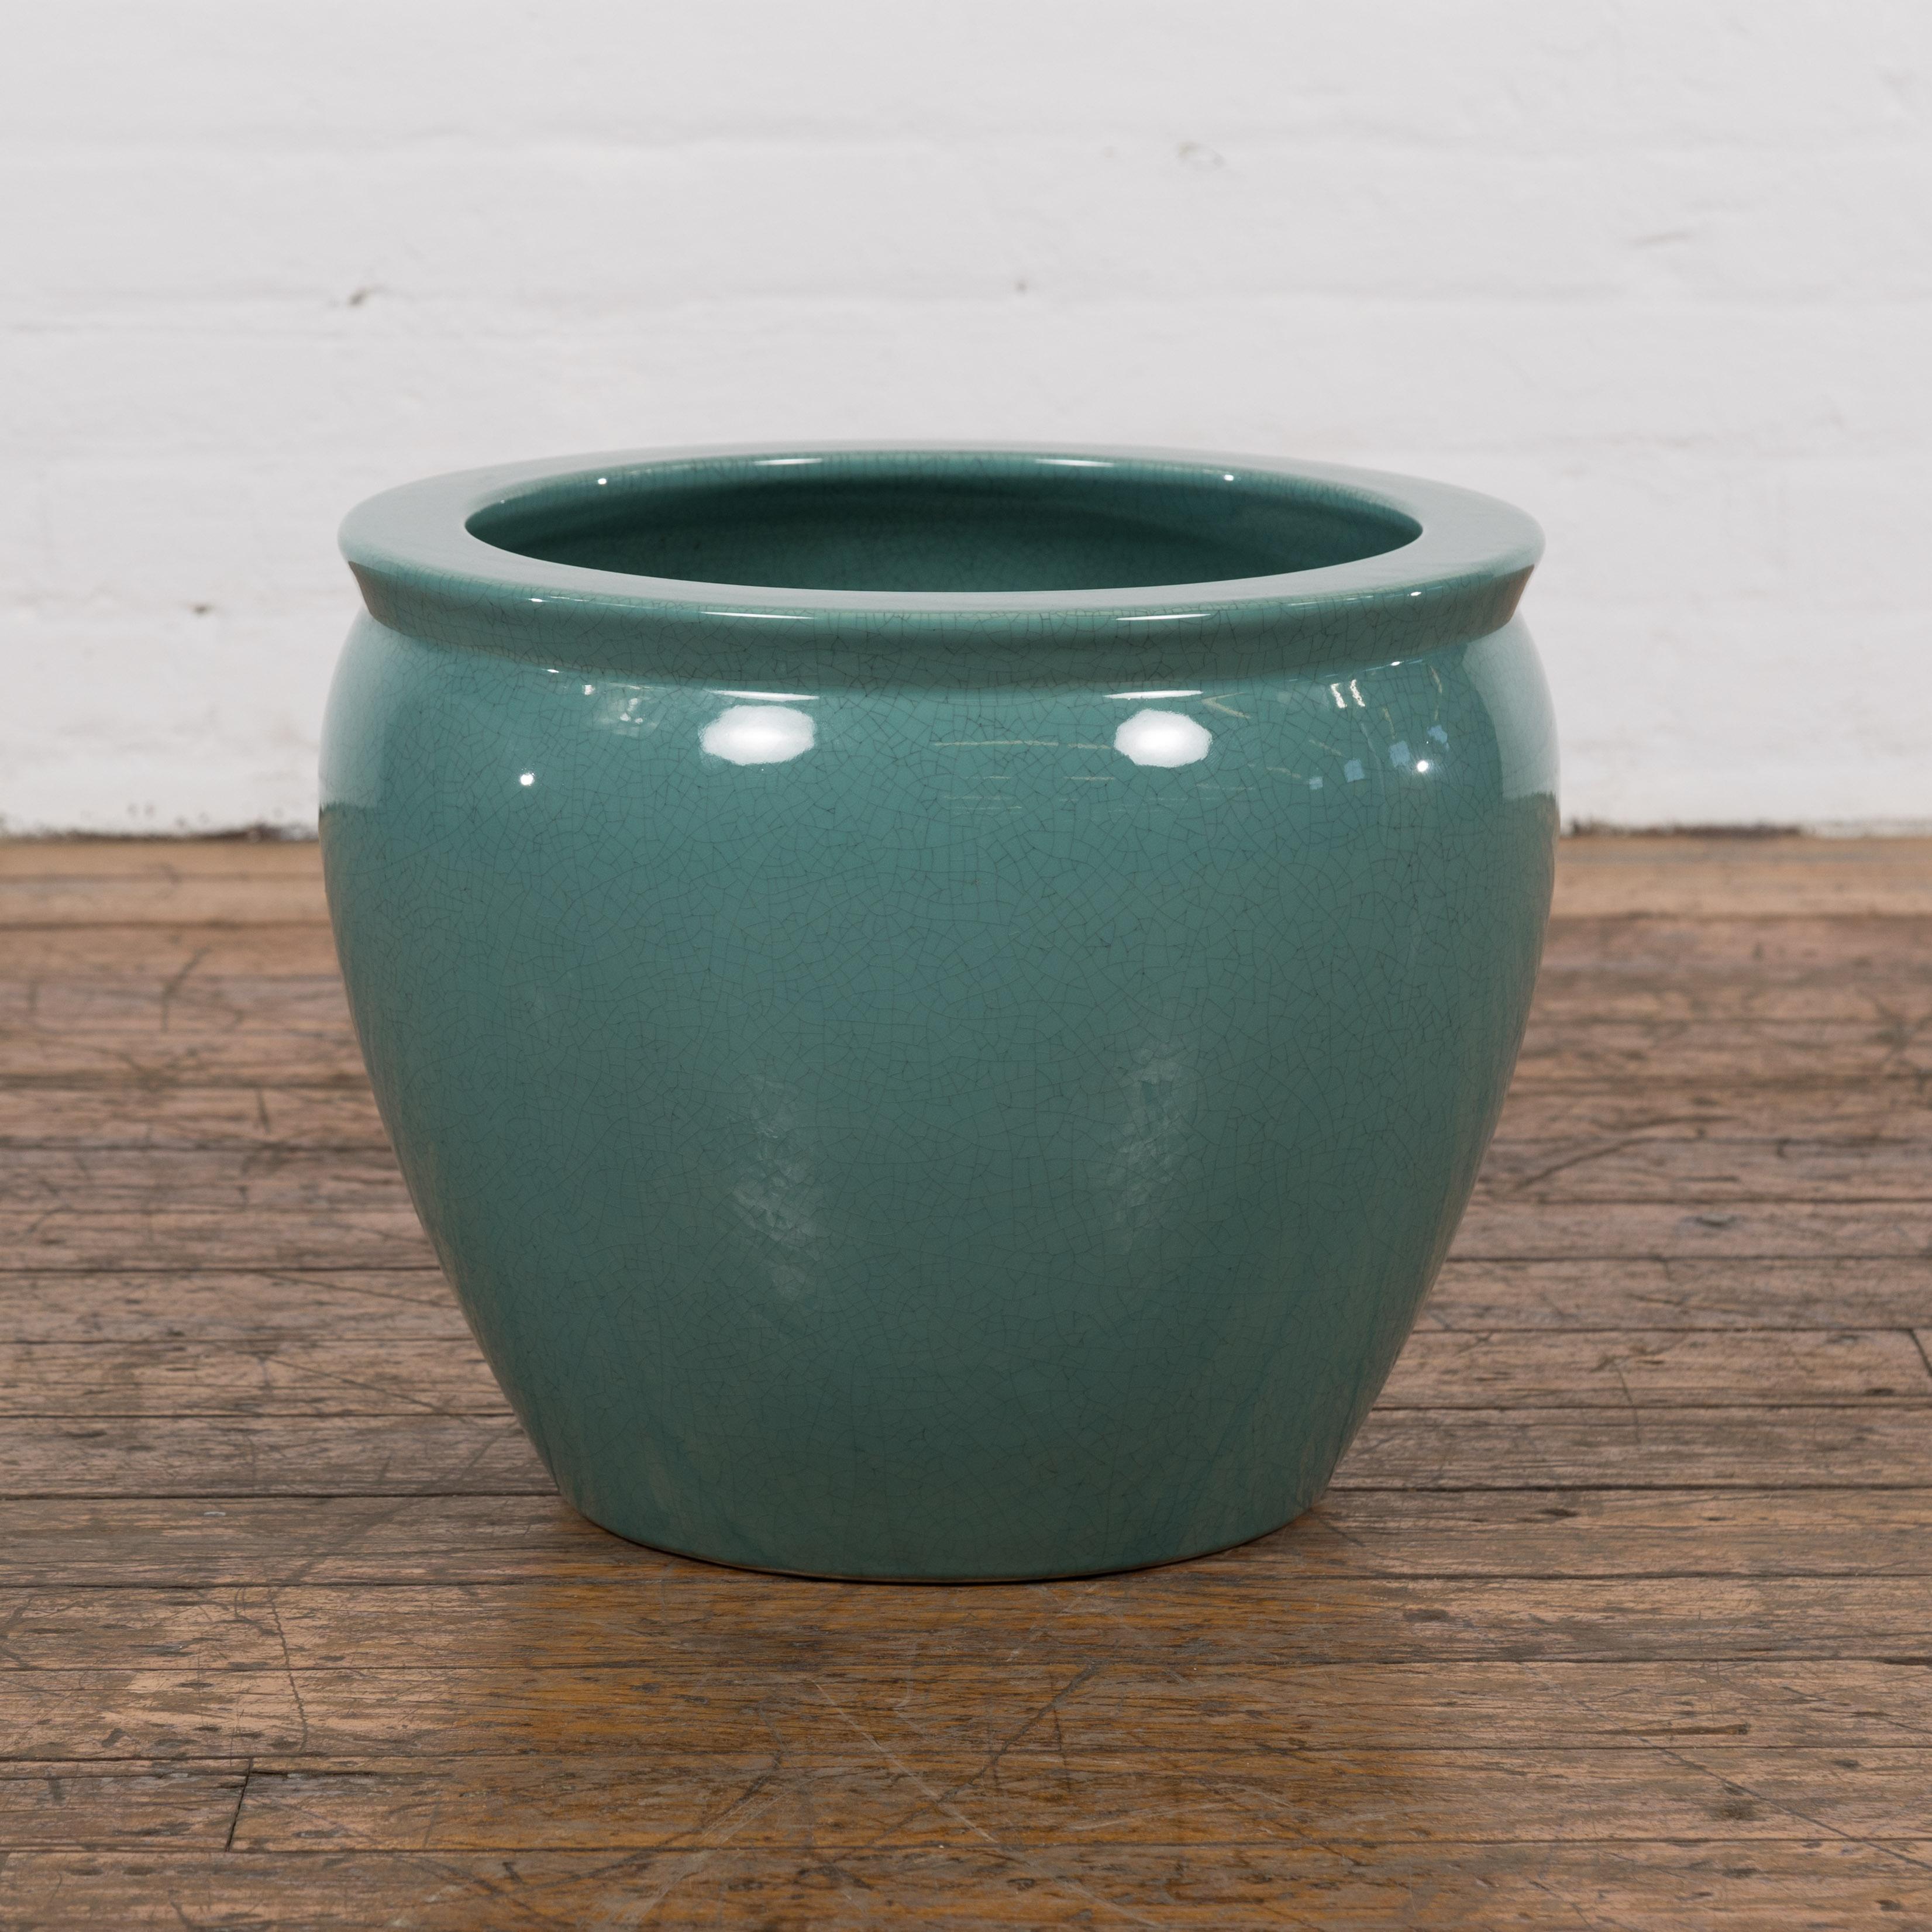 A Midcentury teal glazed ceramic garden planter with circular mouth and tapering lines. Hailing from the golden age of design, this Midcentury ceramic garden planter is a brilliant blend of form and functionality. Coated in a vibrant teal glaze, the